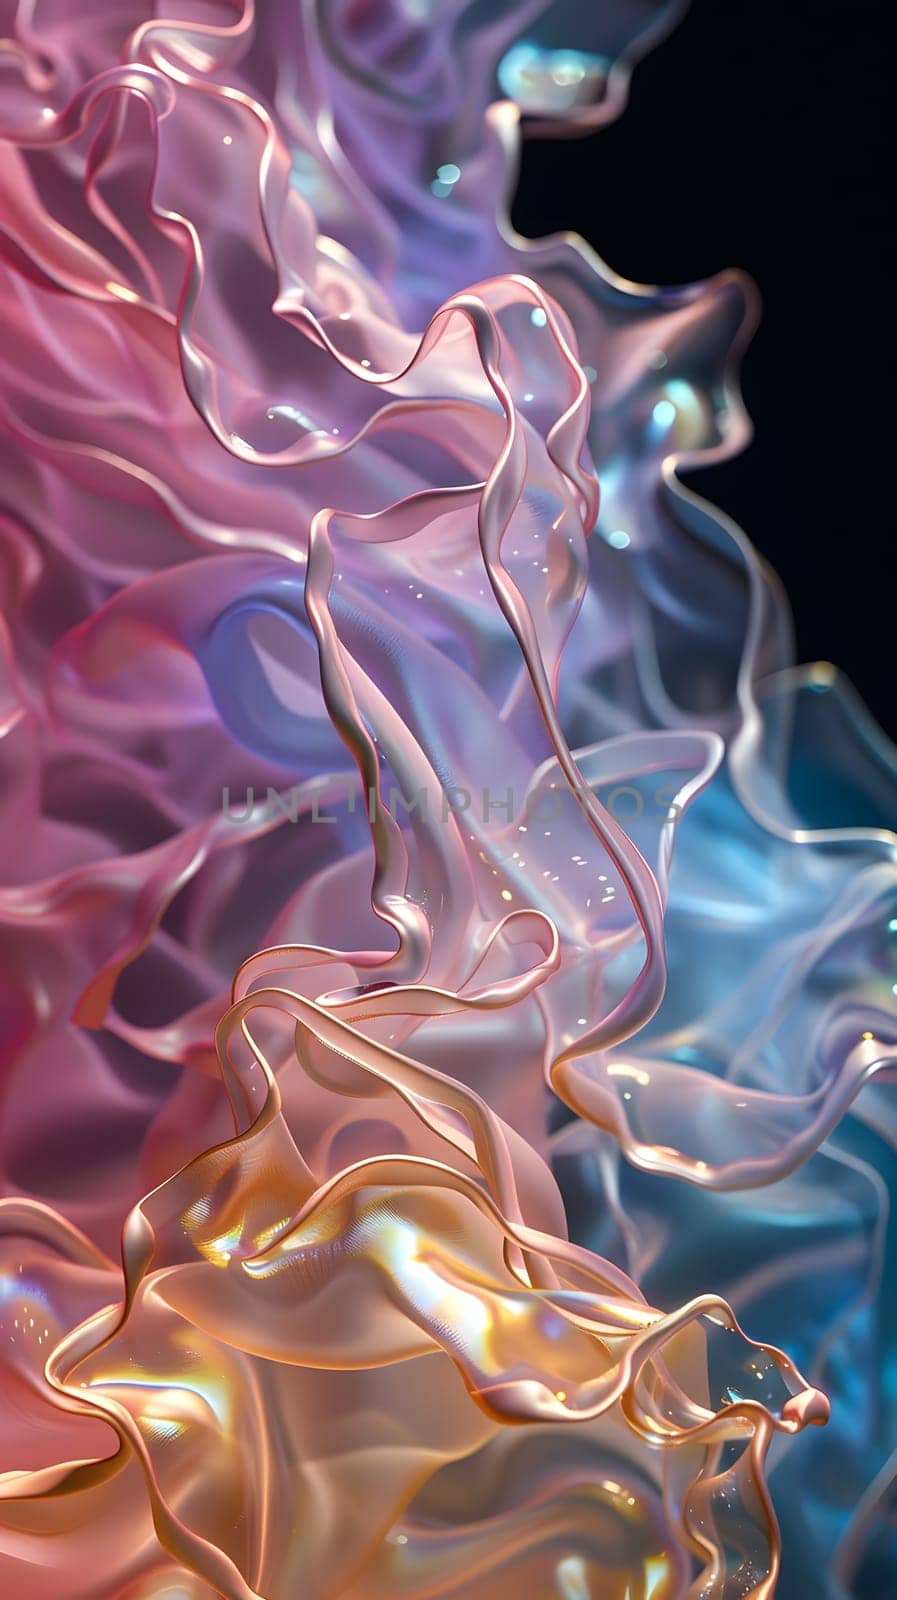 Close up of liquid purple and electric blue CG artwork on black background by Nadtochiy